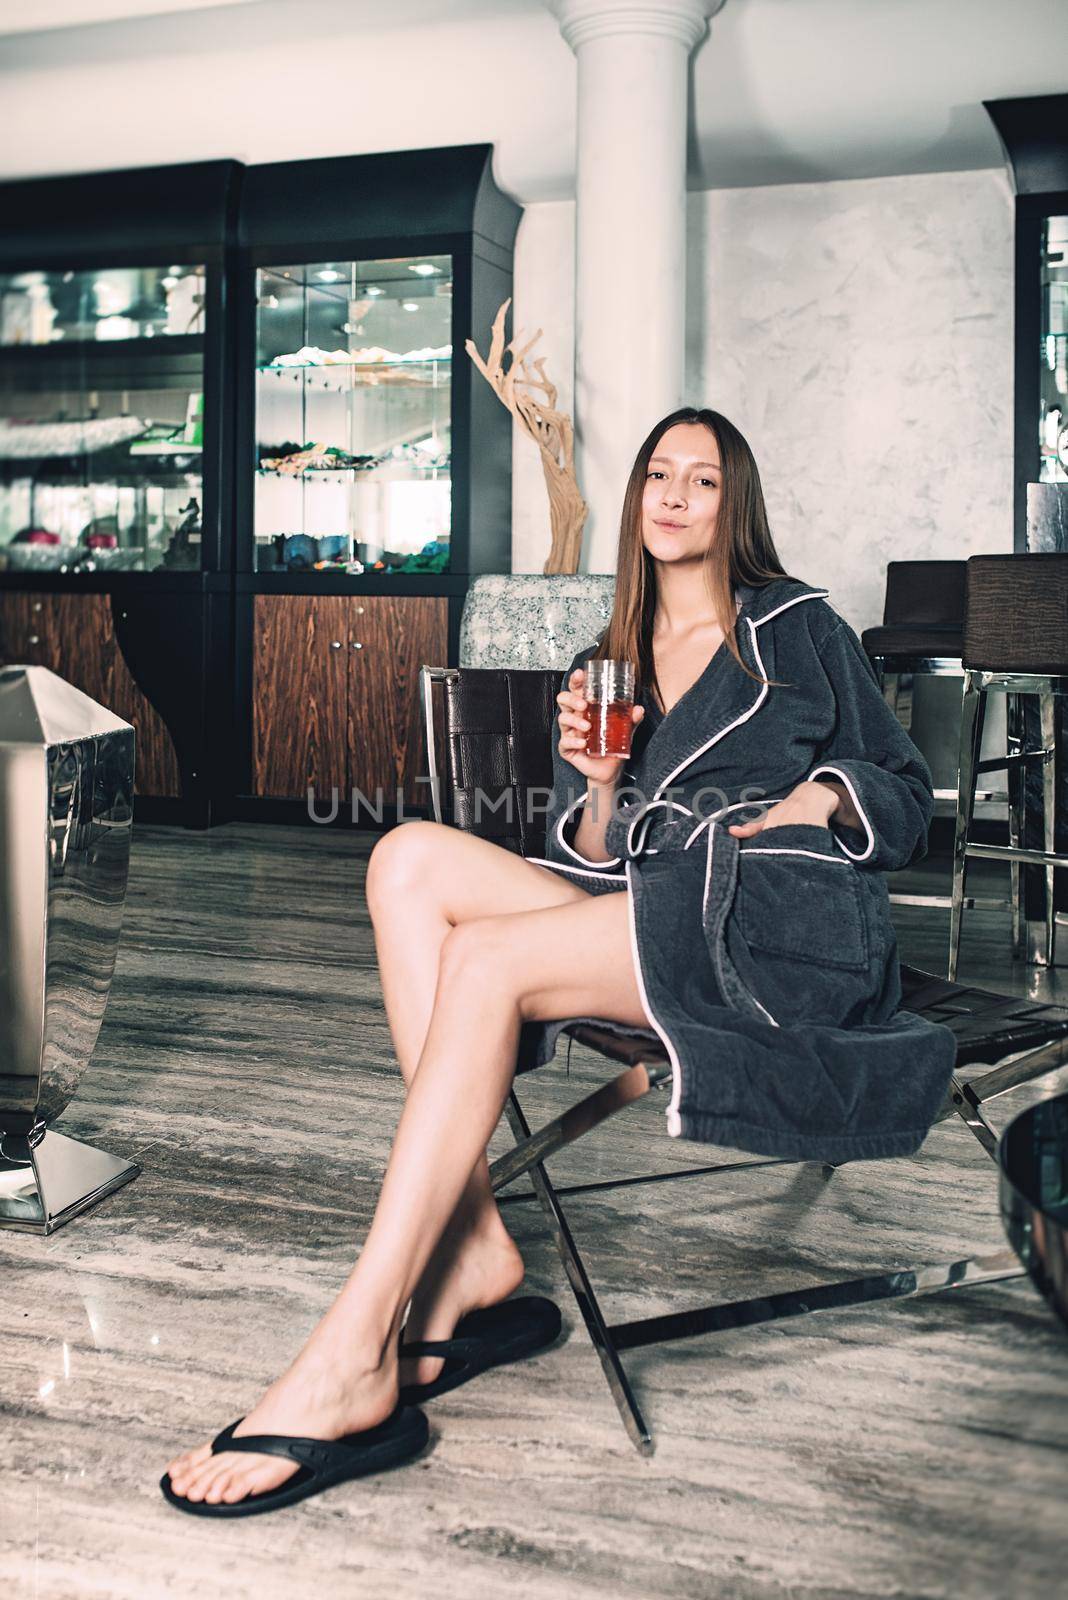 Portrait of young beautiful woman relaxing in a chair in a bathrobe with a detox drink in a hand. Luxery spa center